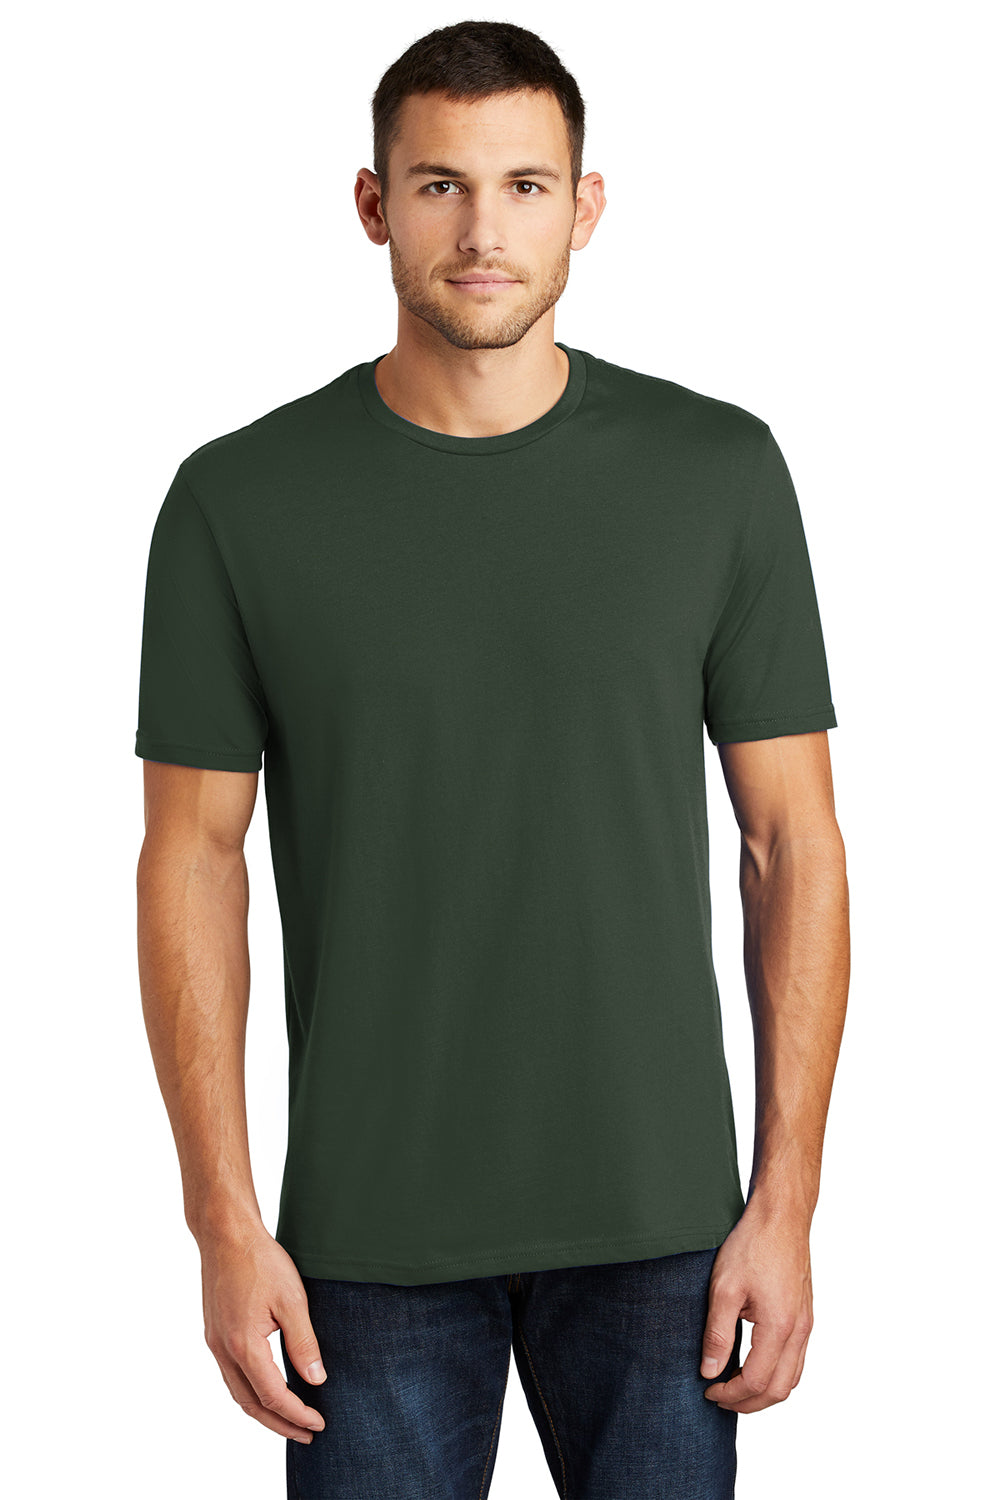 District DT104 Mens Perfect Weight Short Sleeve Crewneck T-Shirt Forest Green Front